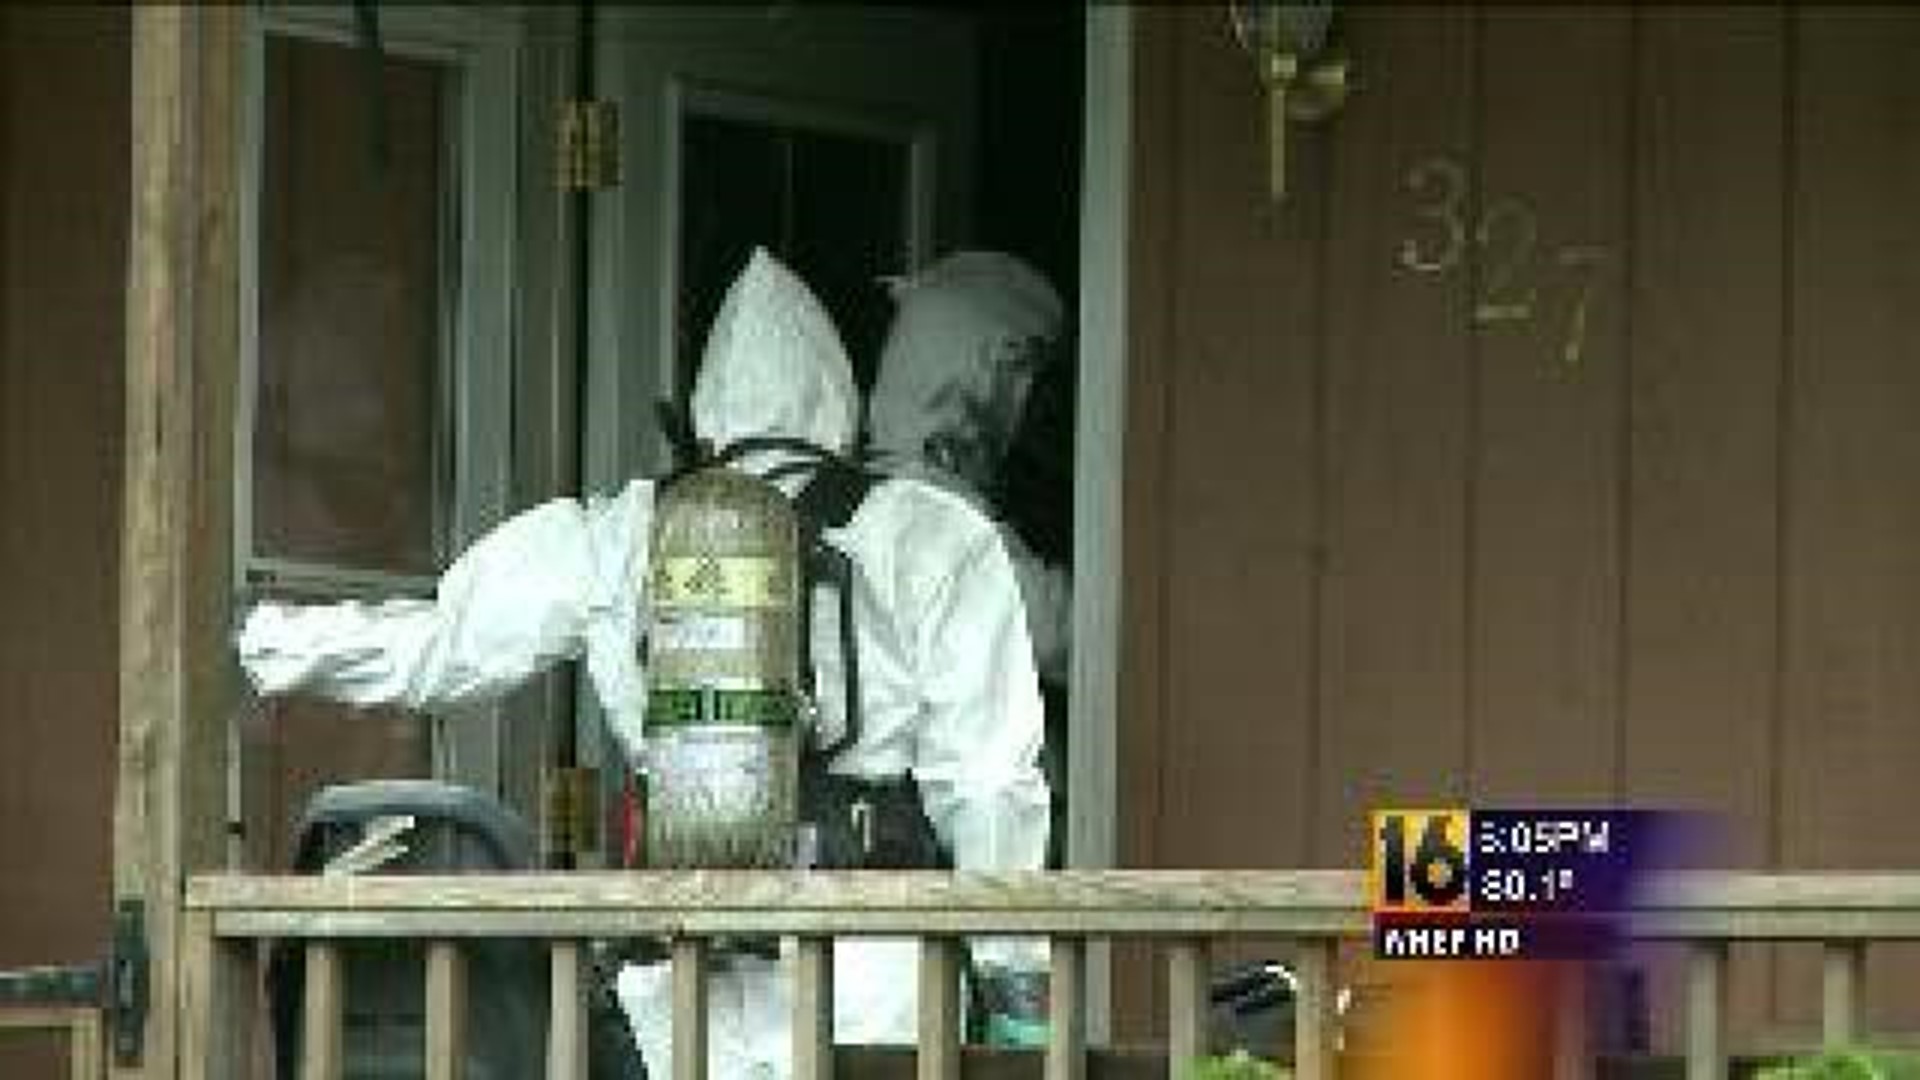 Police: Another Meth Lab in Berwick